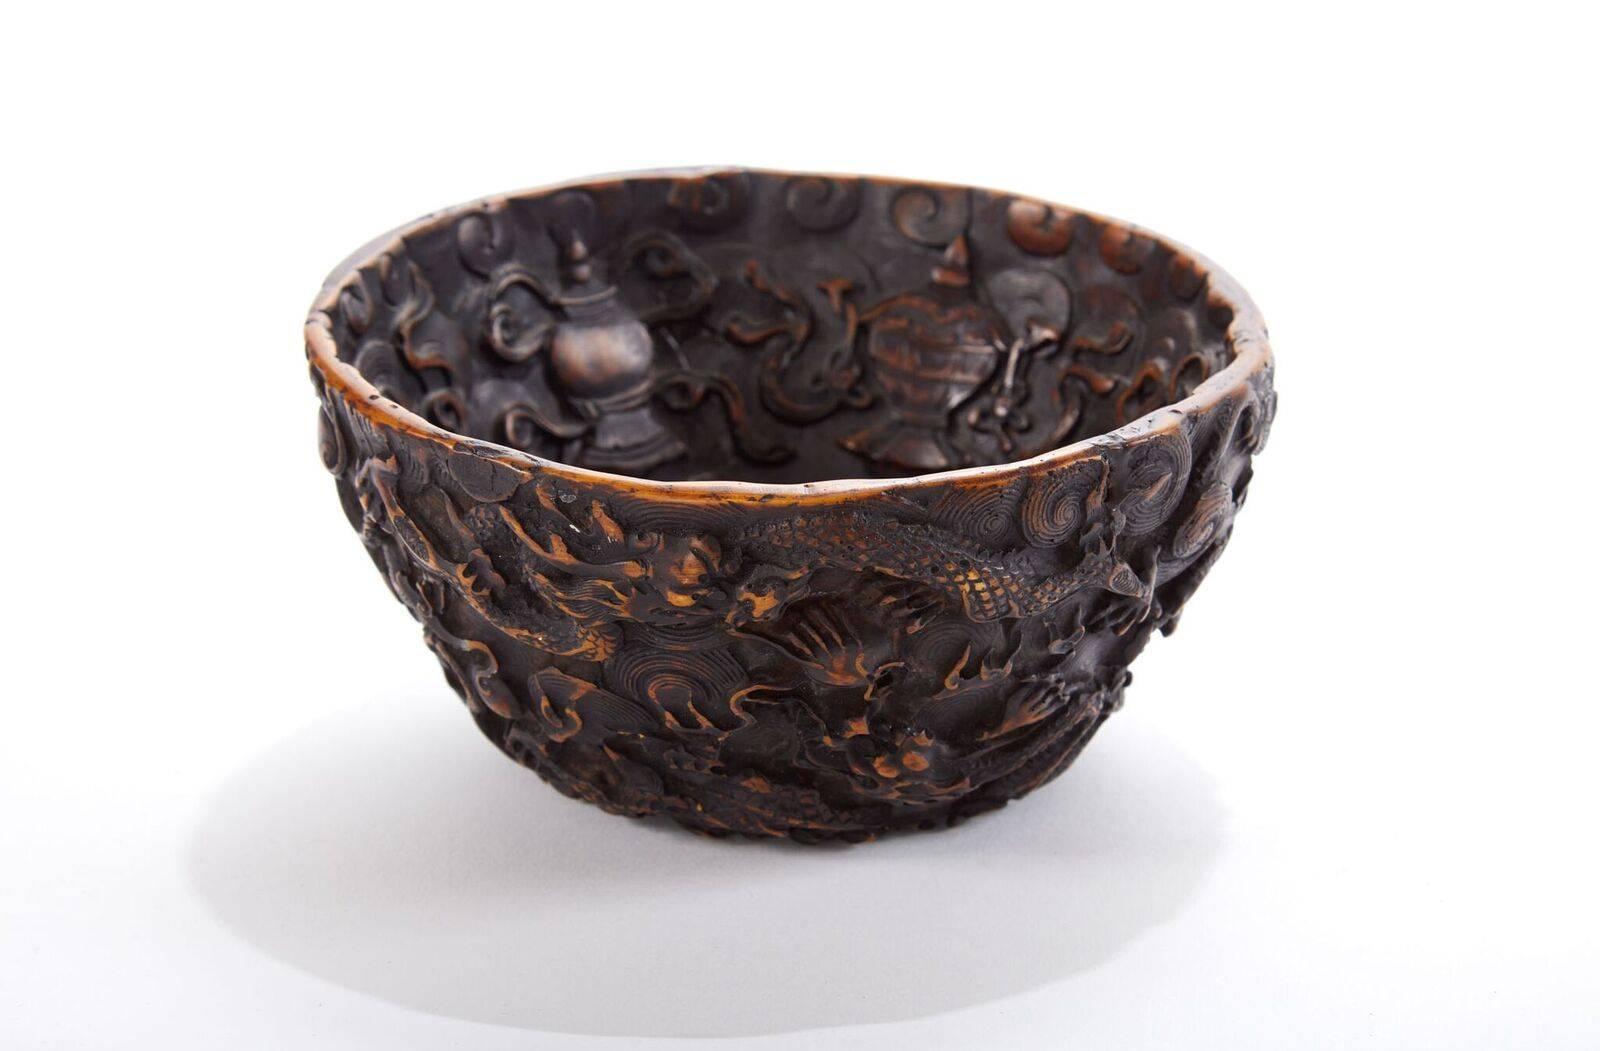 19th century Black Forest (German) carved bowl 
Measure: 3 inch height x 5.75 inch diameter.